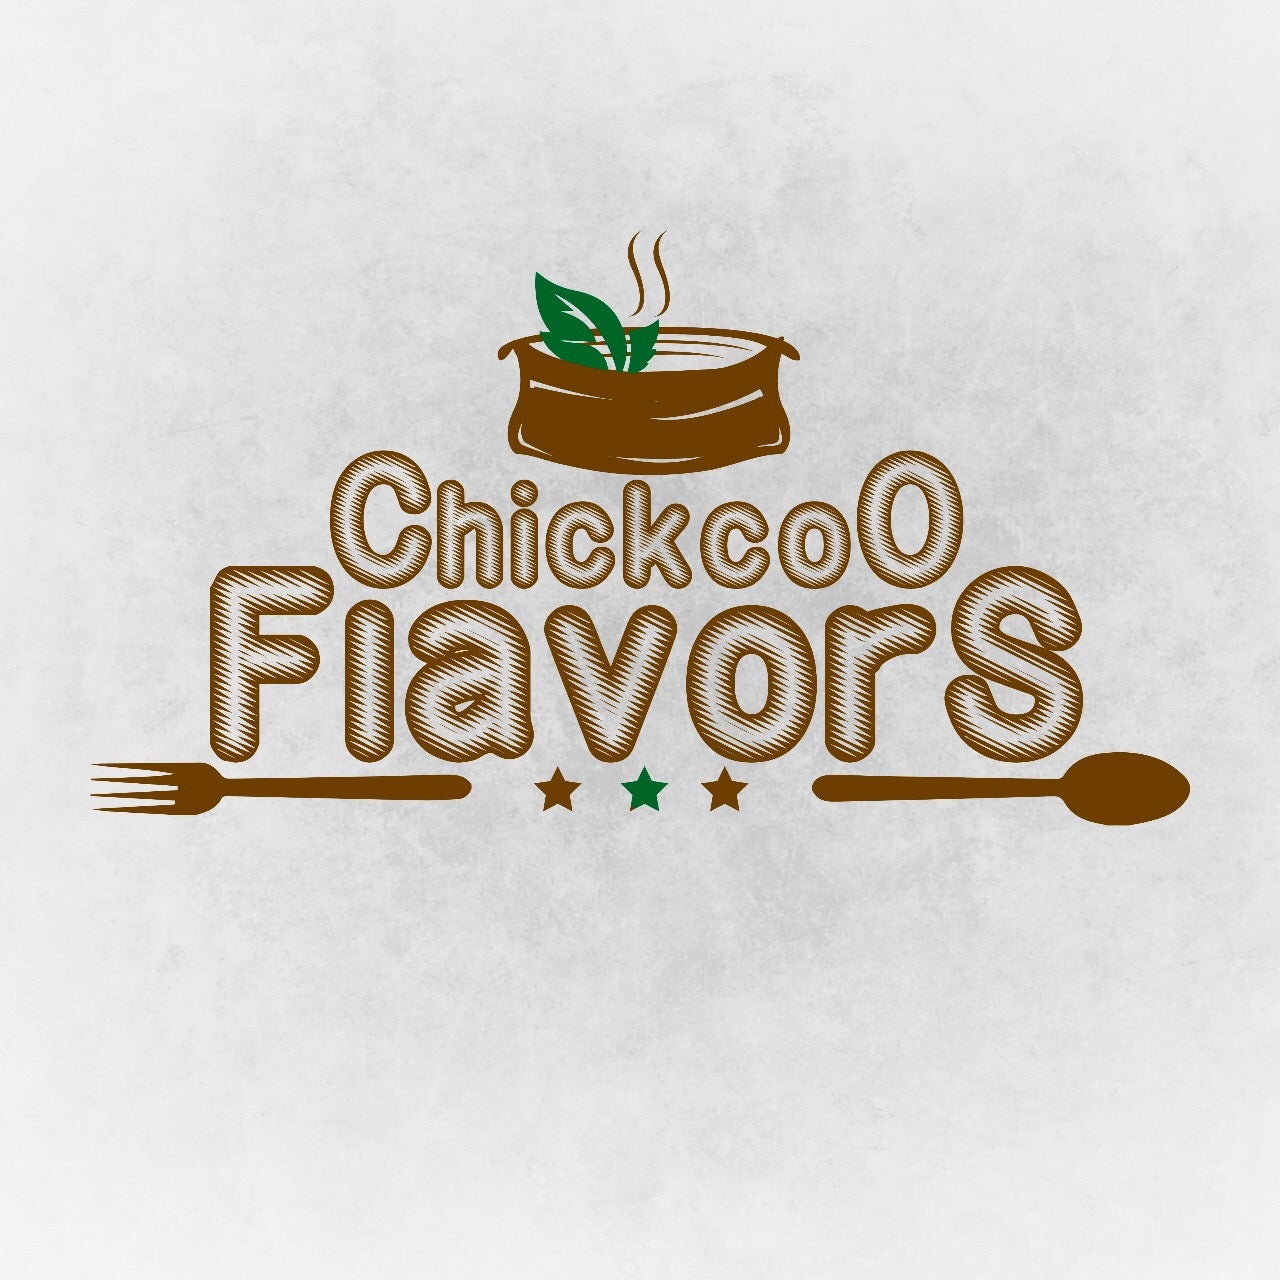 chickcoo flavors